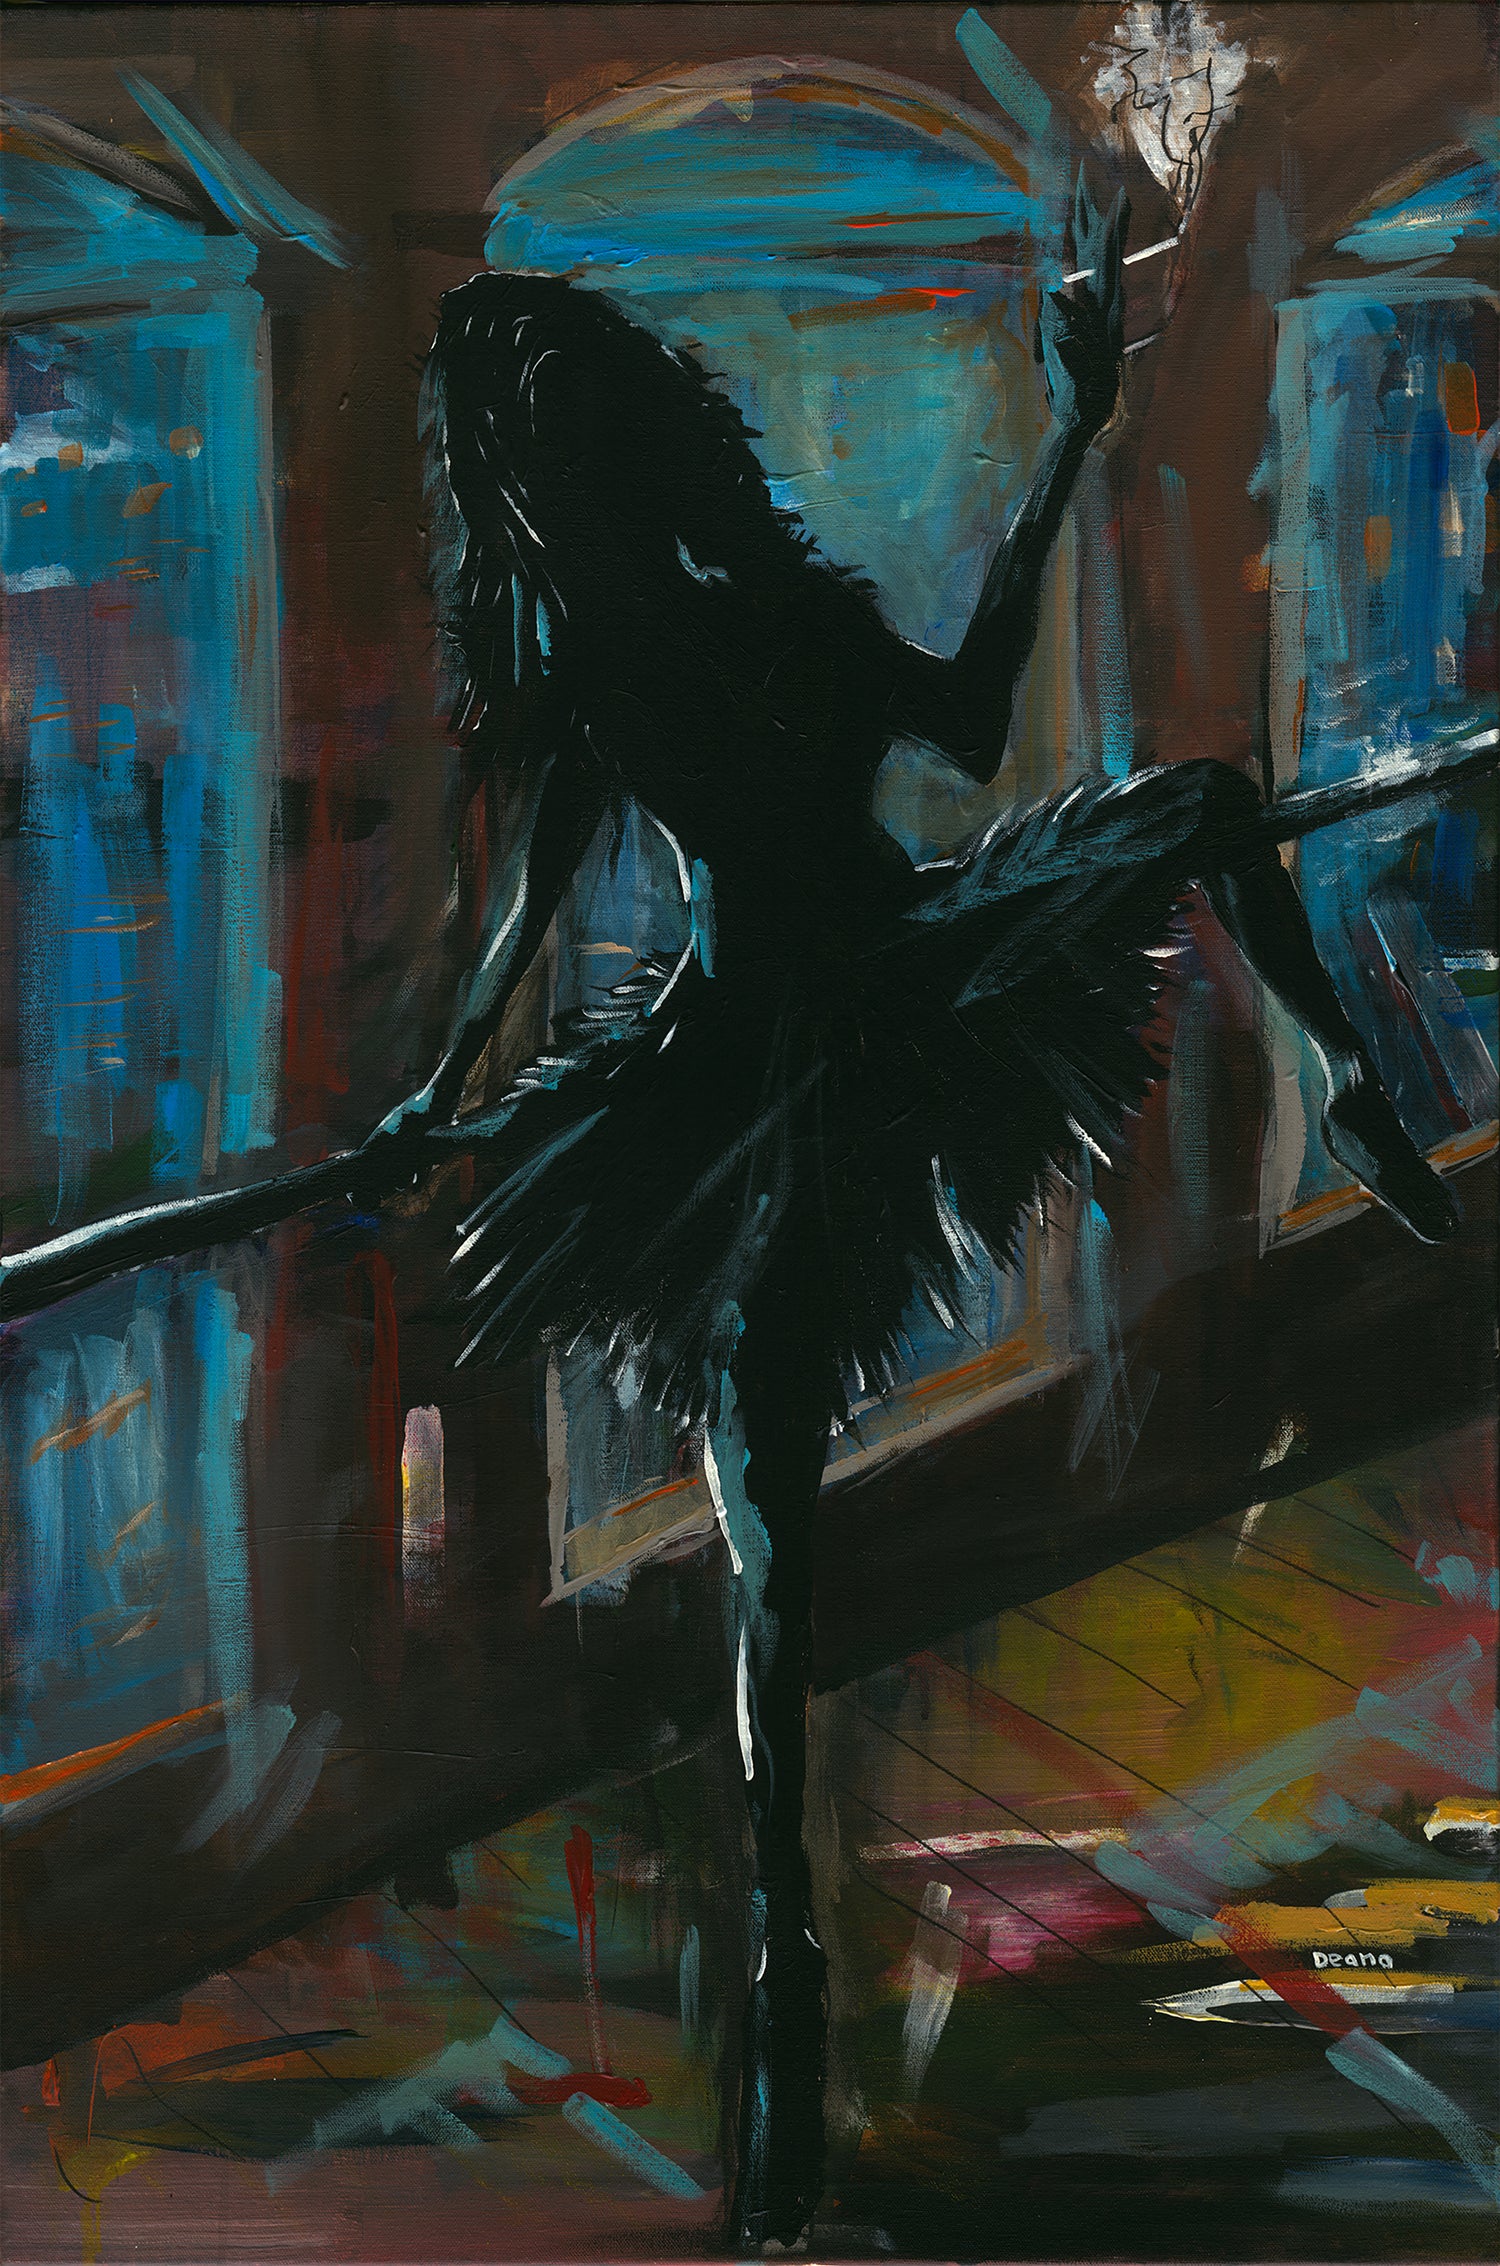 An acrylic and pastel painting of a ballerina with a dark background. She is smoking a cigarette and is dressed in a black tutu. Her body is obscured by the darkness, giving the impression of a mysterious and elegant figure. Deano Hewitts - 2016-2018